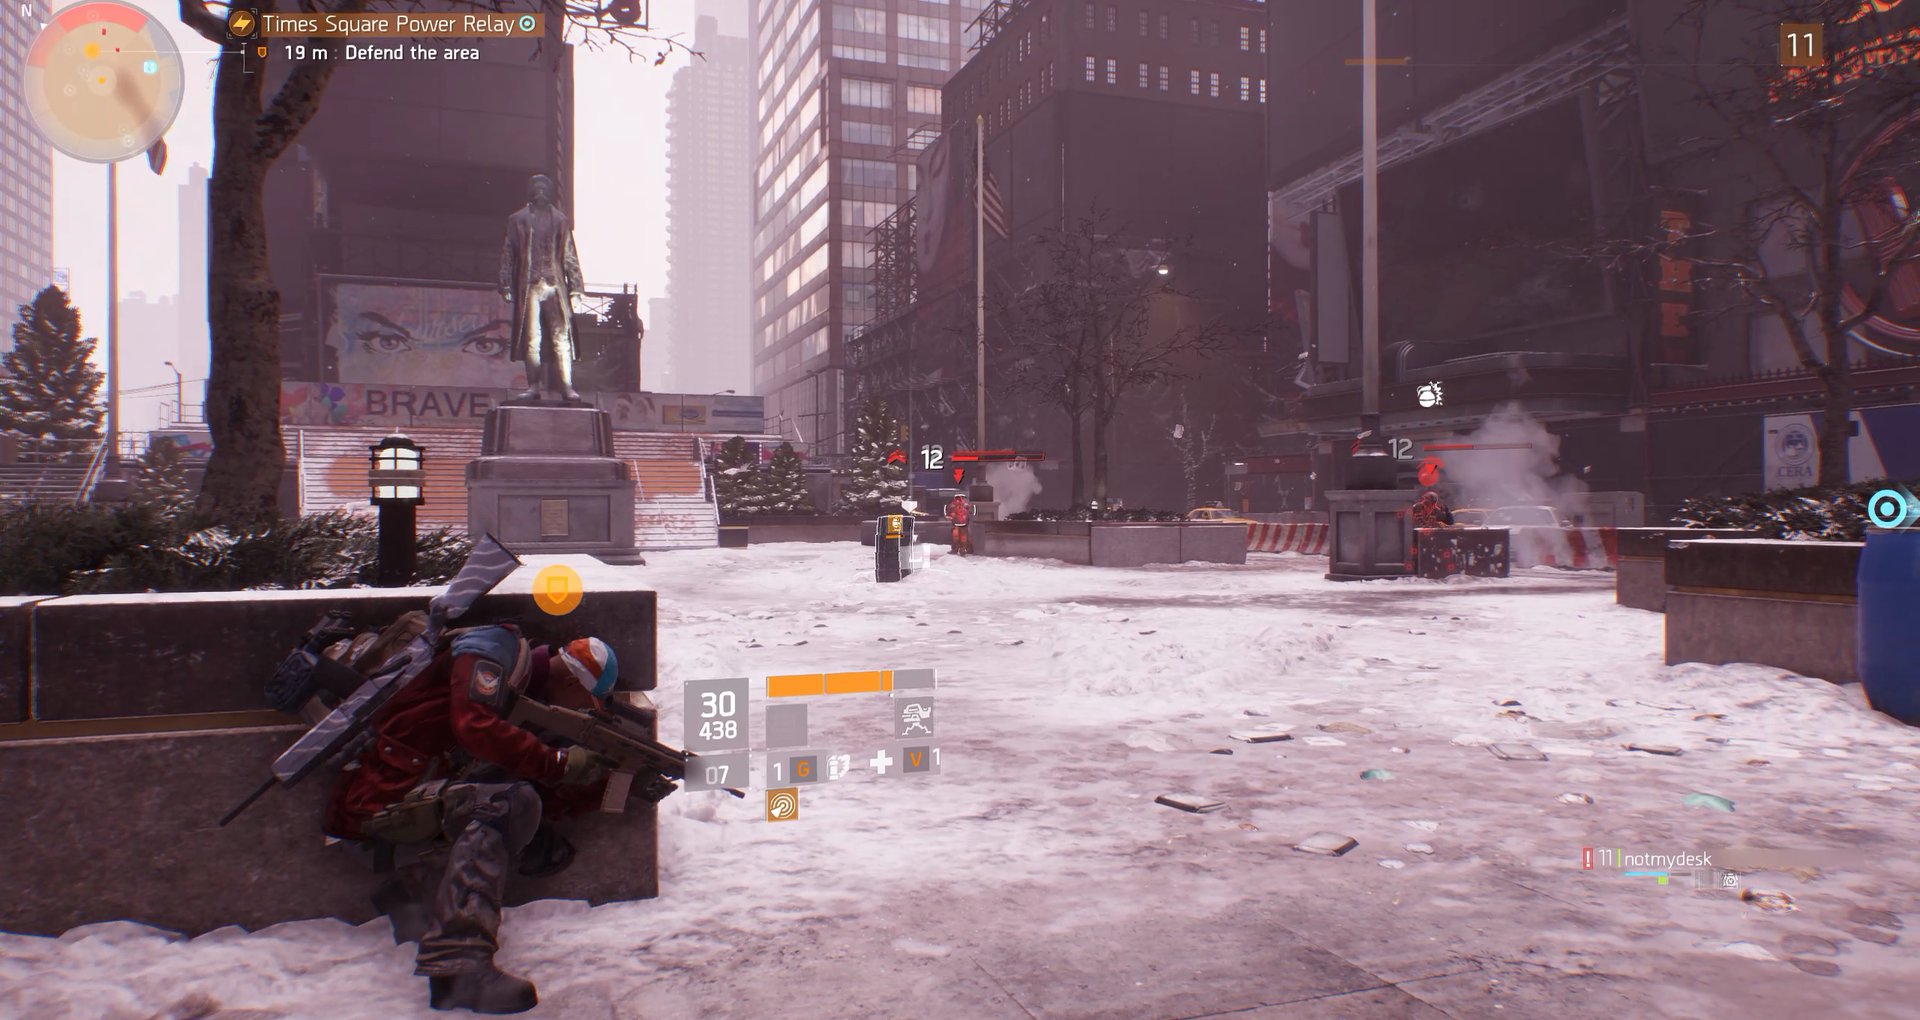 Tom Clancys The Division review